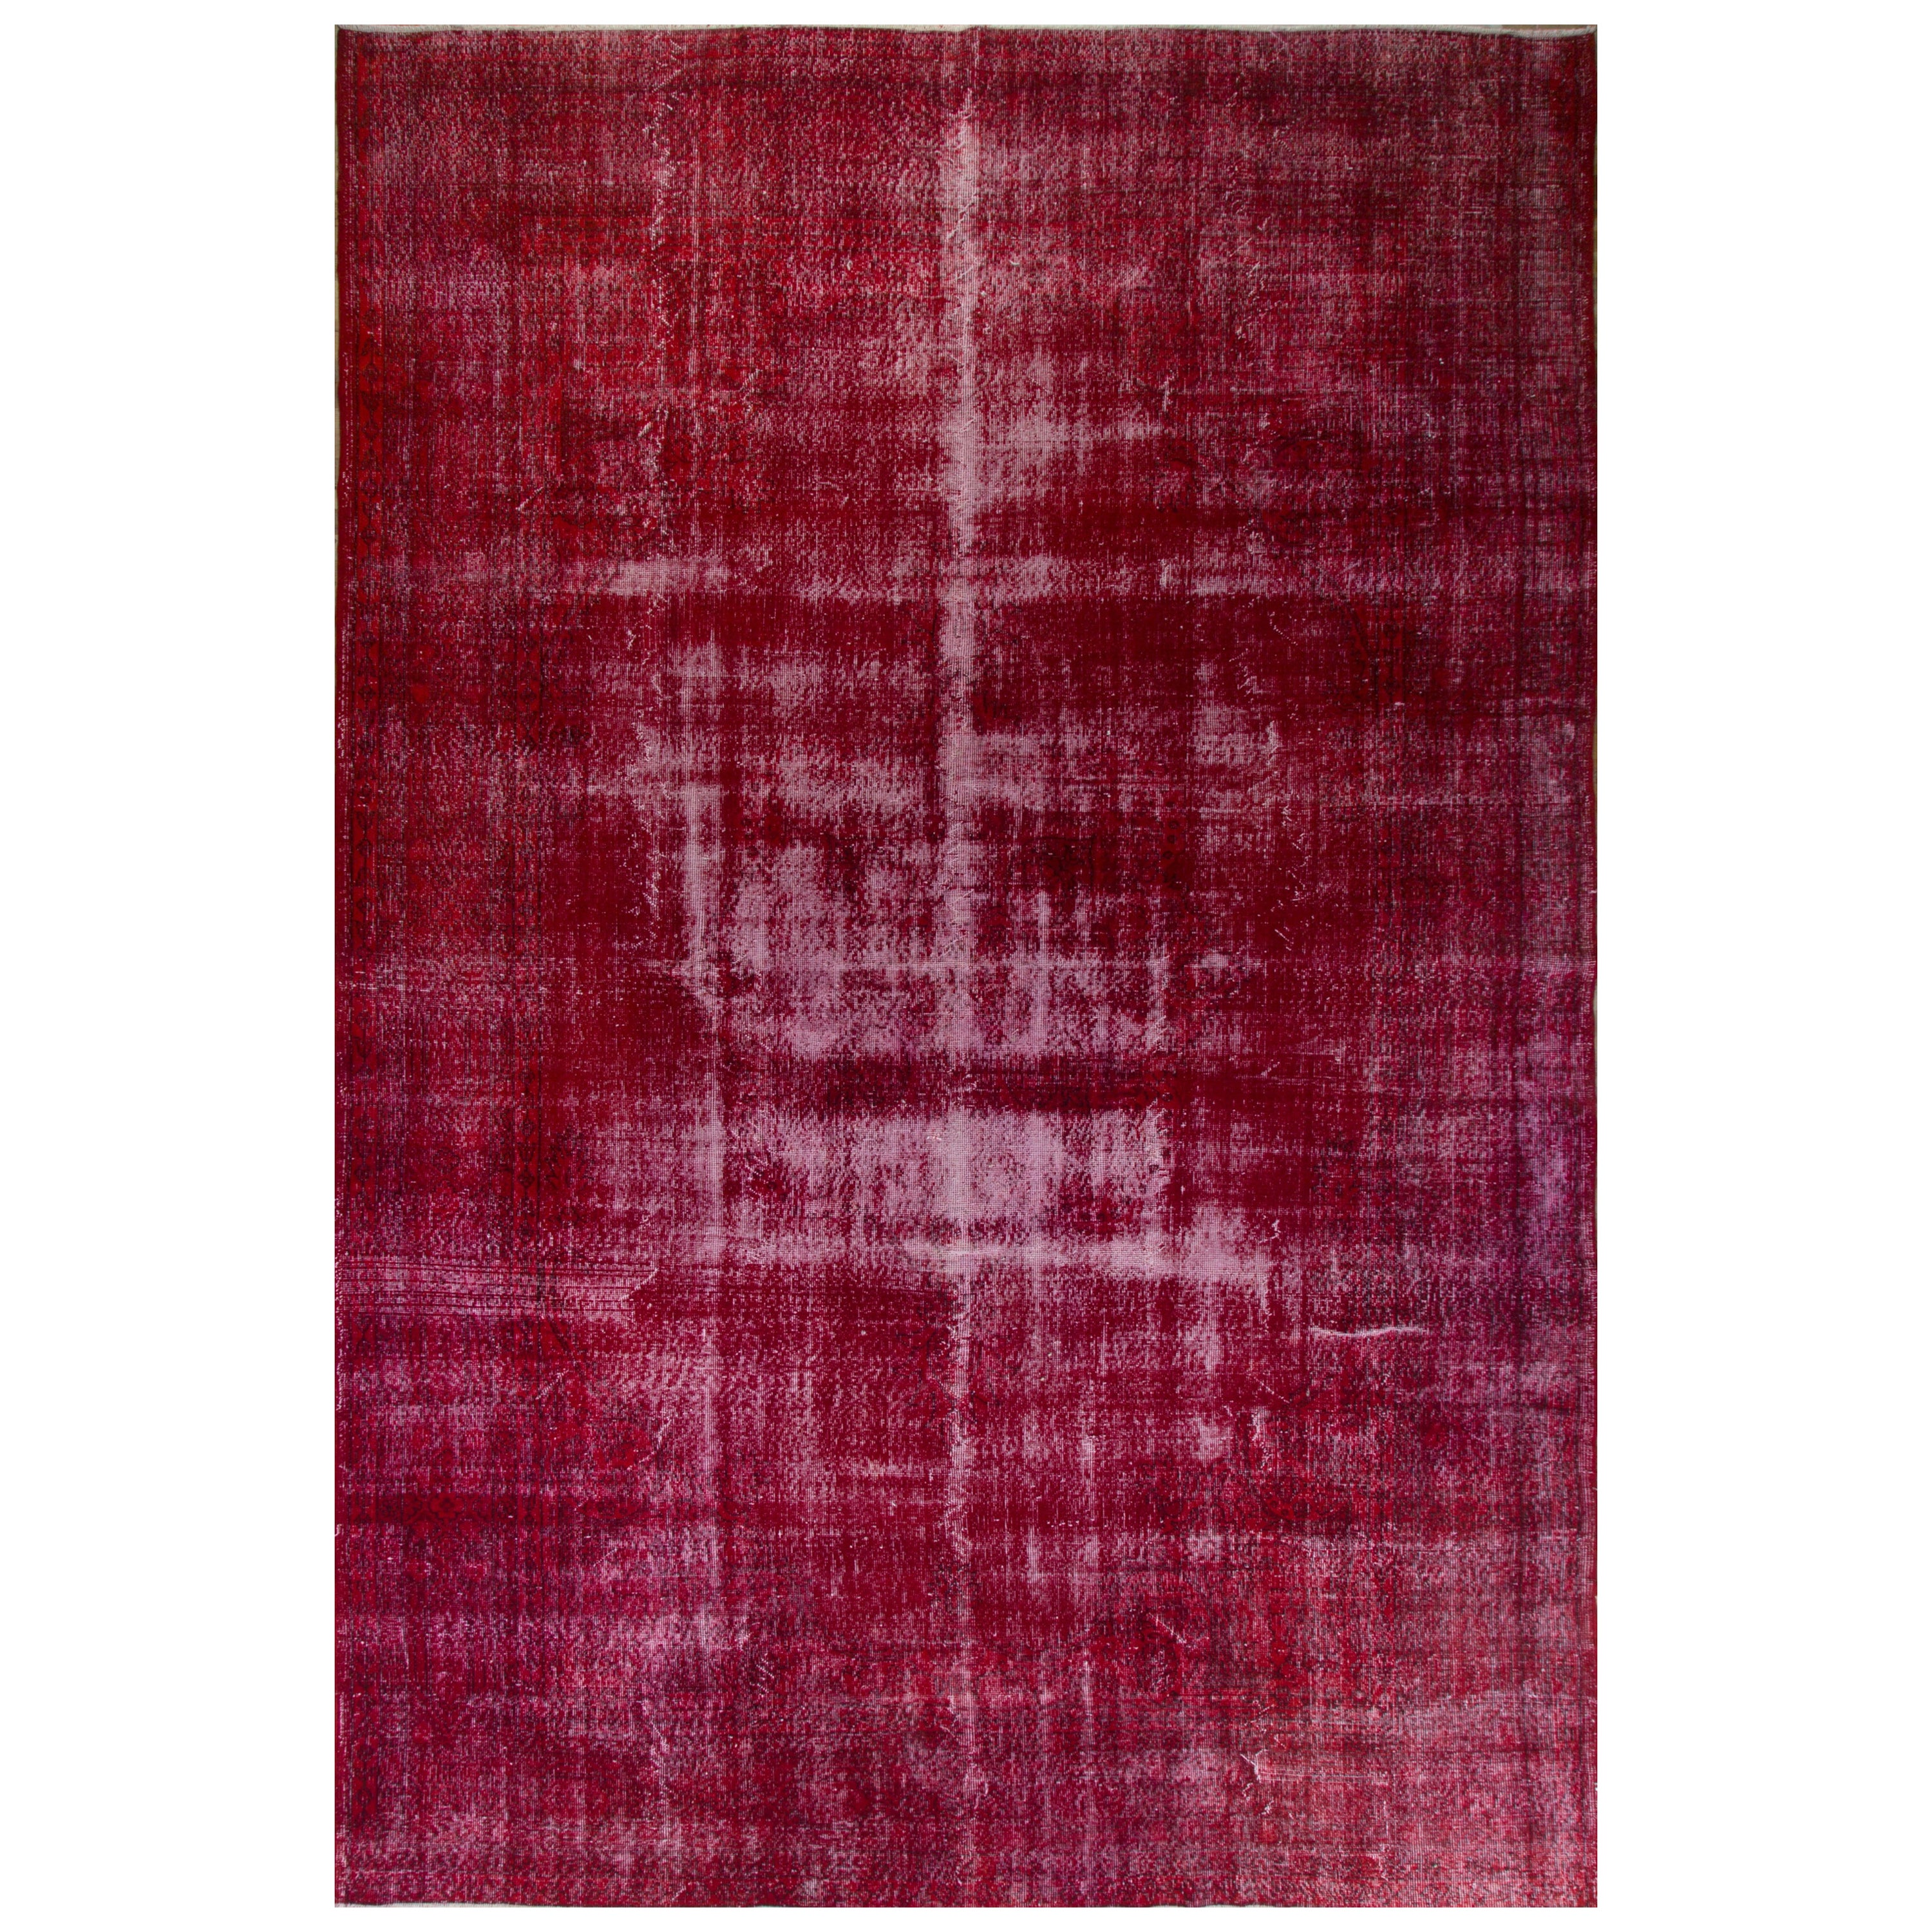 8.4x12.8 ft Modern Handmade Area Rug OverDyed in Red, Shabby Chic Turkish Carpet For Sale